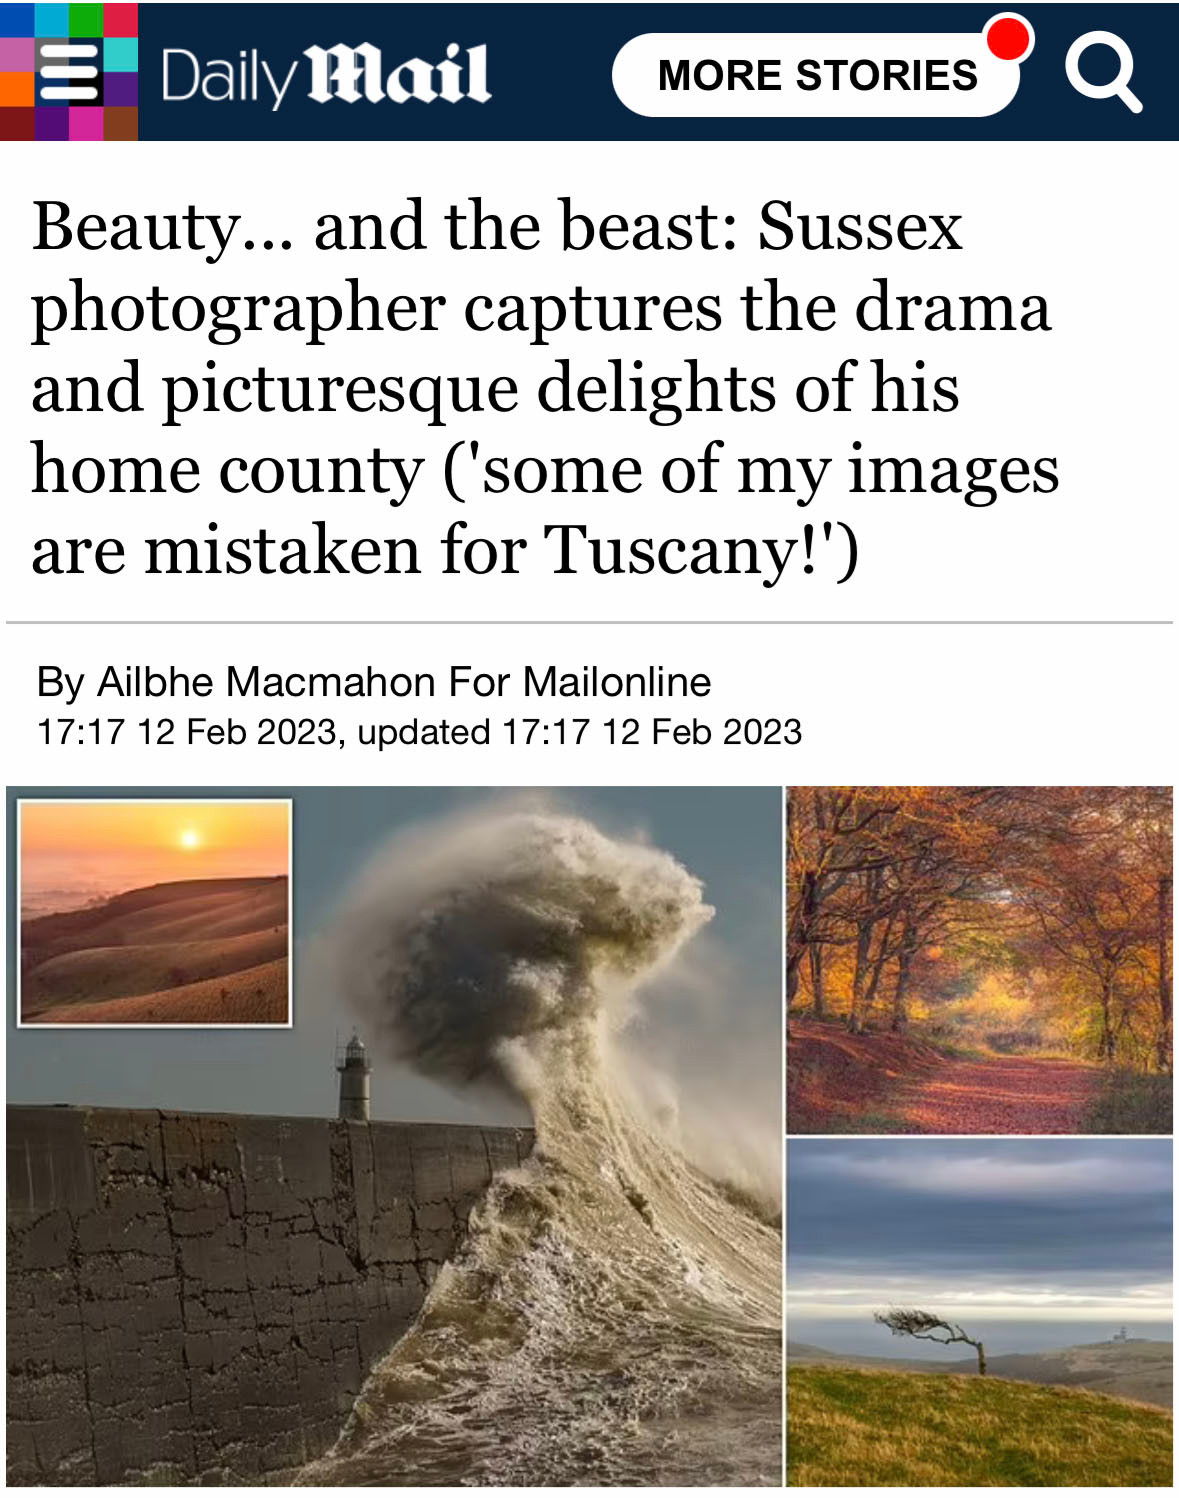 Mail online interview about my love of photographing Sussex Landscapes